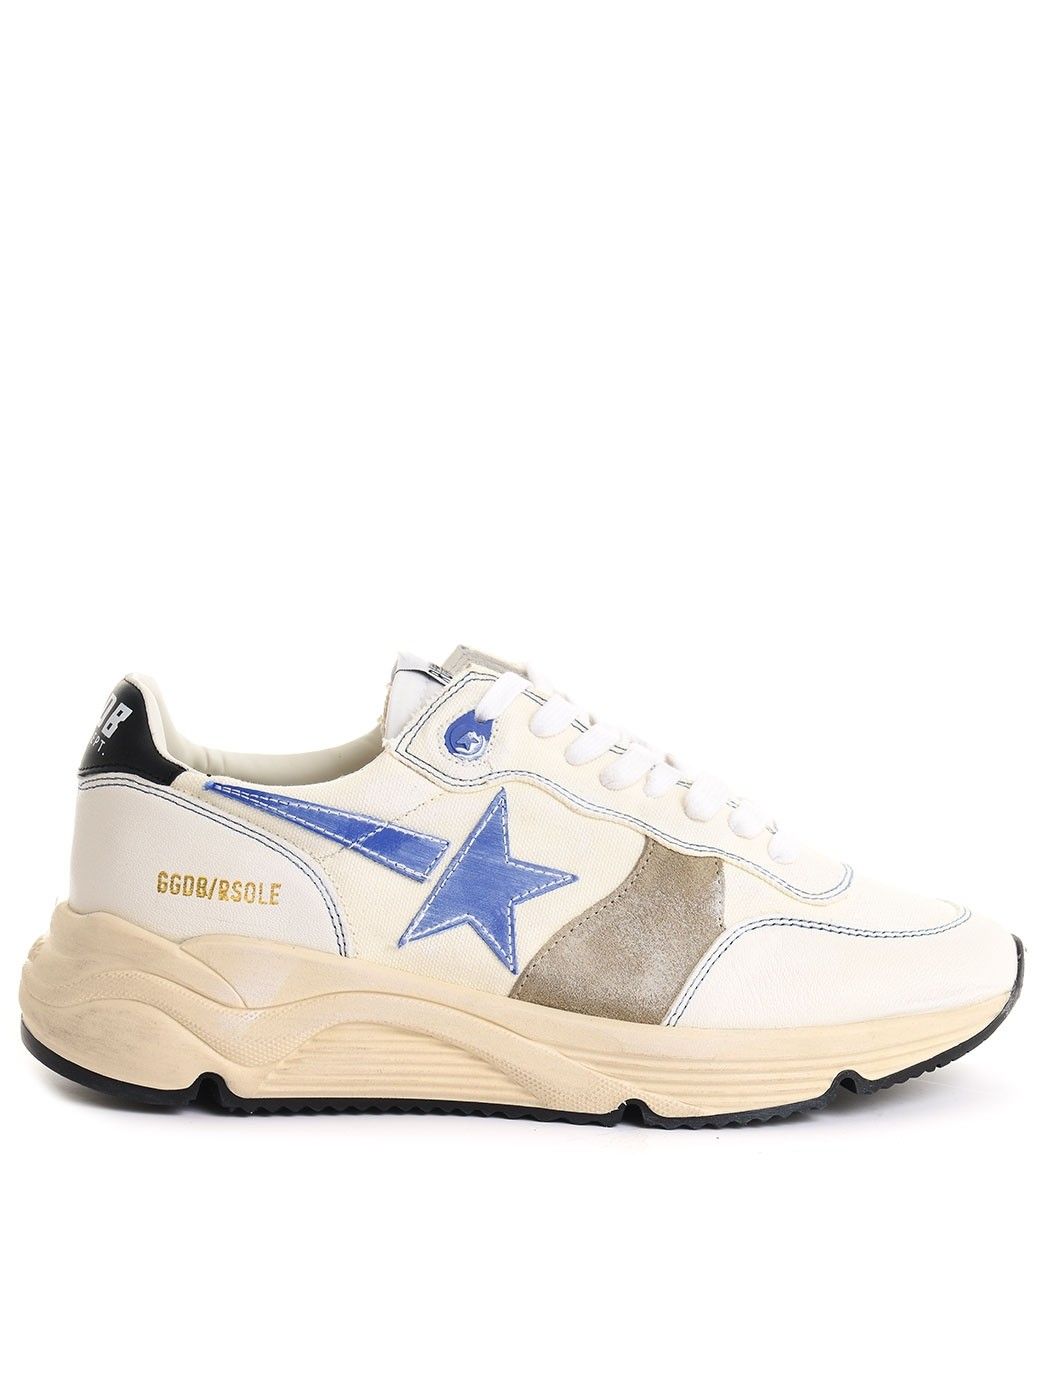  MAN SHOES,CHURCH'S SHOES,CHURCH'S LOAFER SHOES,GOLDEN GOOSE SNEAKERS,GOLDEN GOOSE SHOES,DIADORA HERITAGE SNEAKERS  GOLDEN GOOSE GMF00215